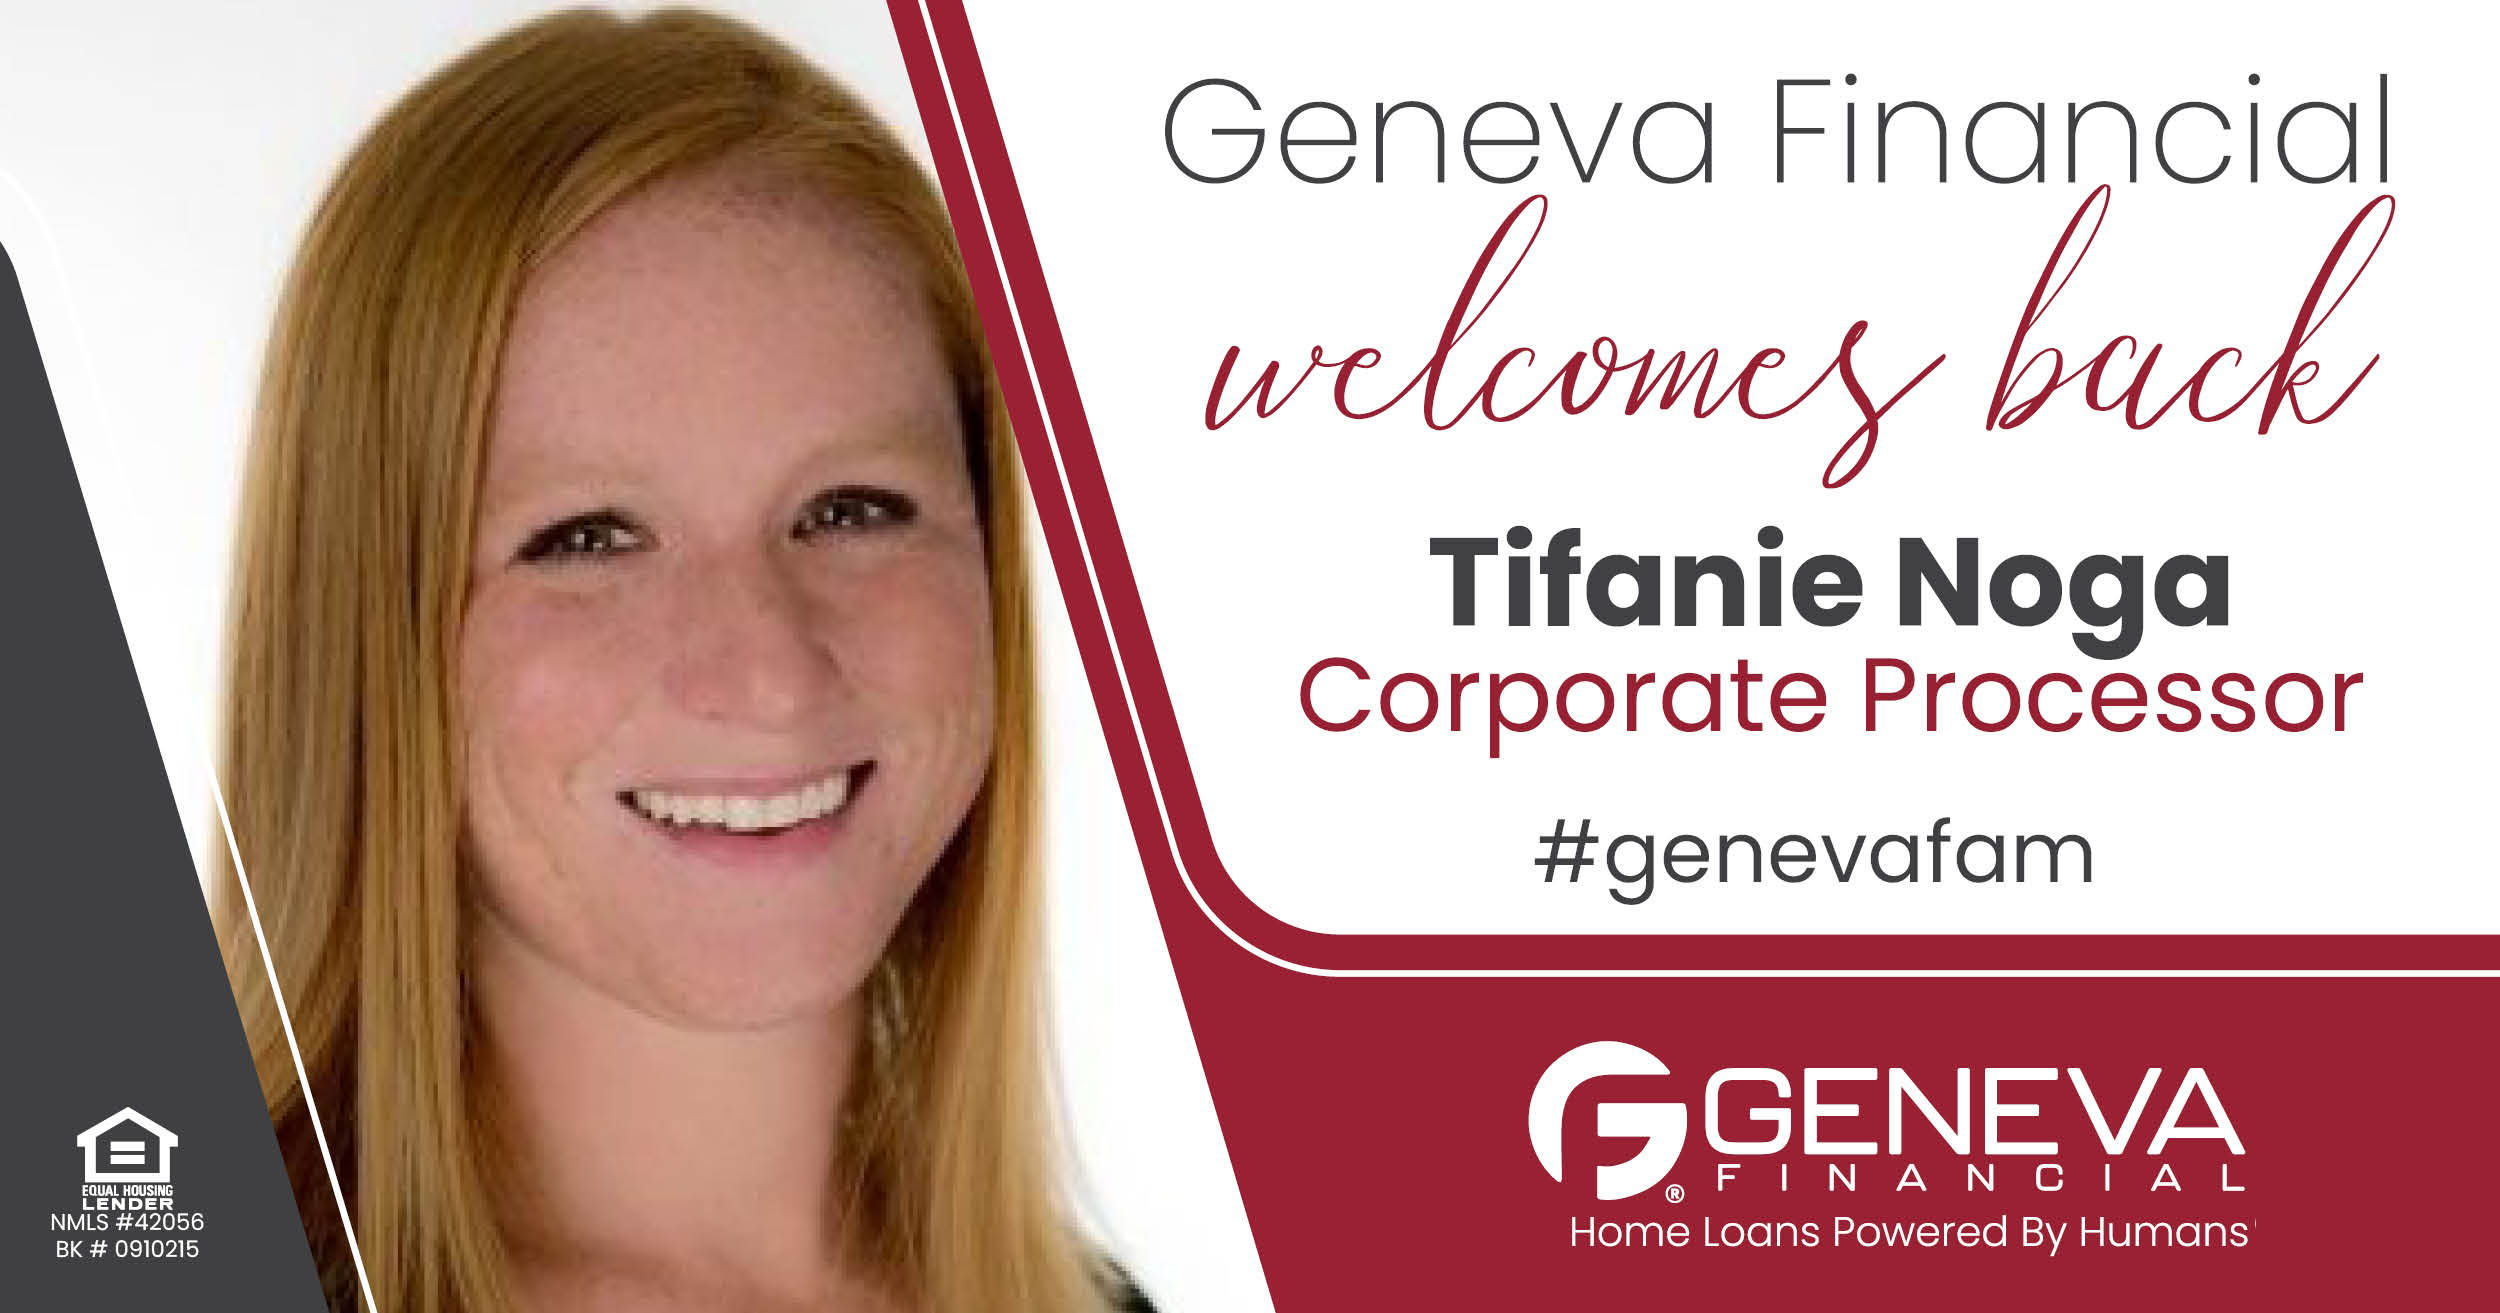 Geneva Financial Welcomes Back Processor Tifanie Noga to Geneva Corporate – Home Loans Powered by Humans®.